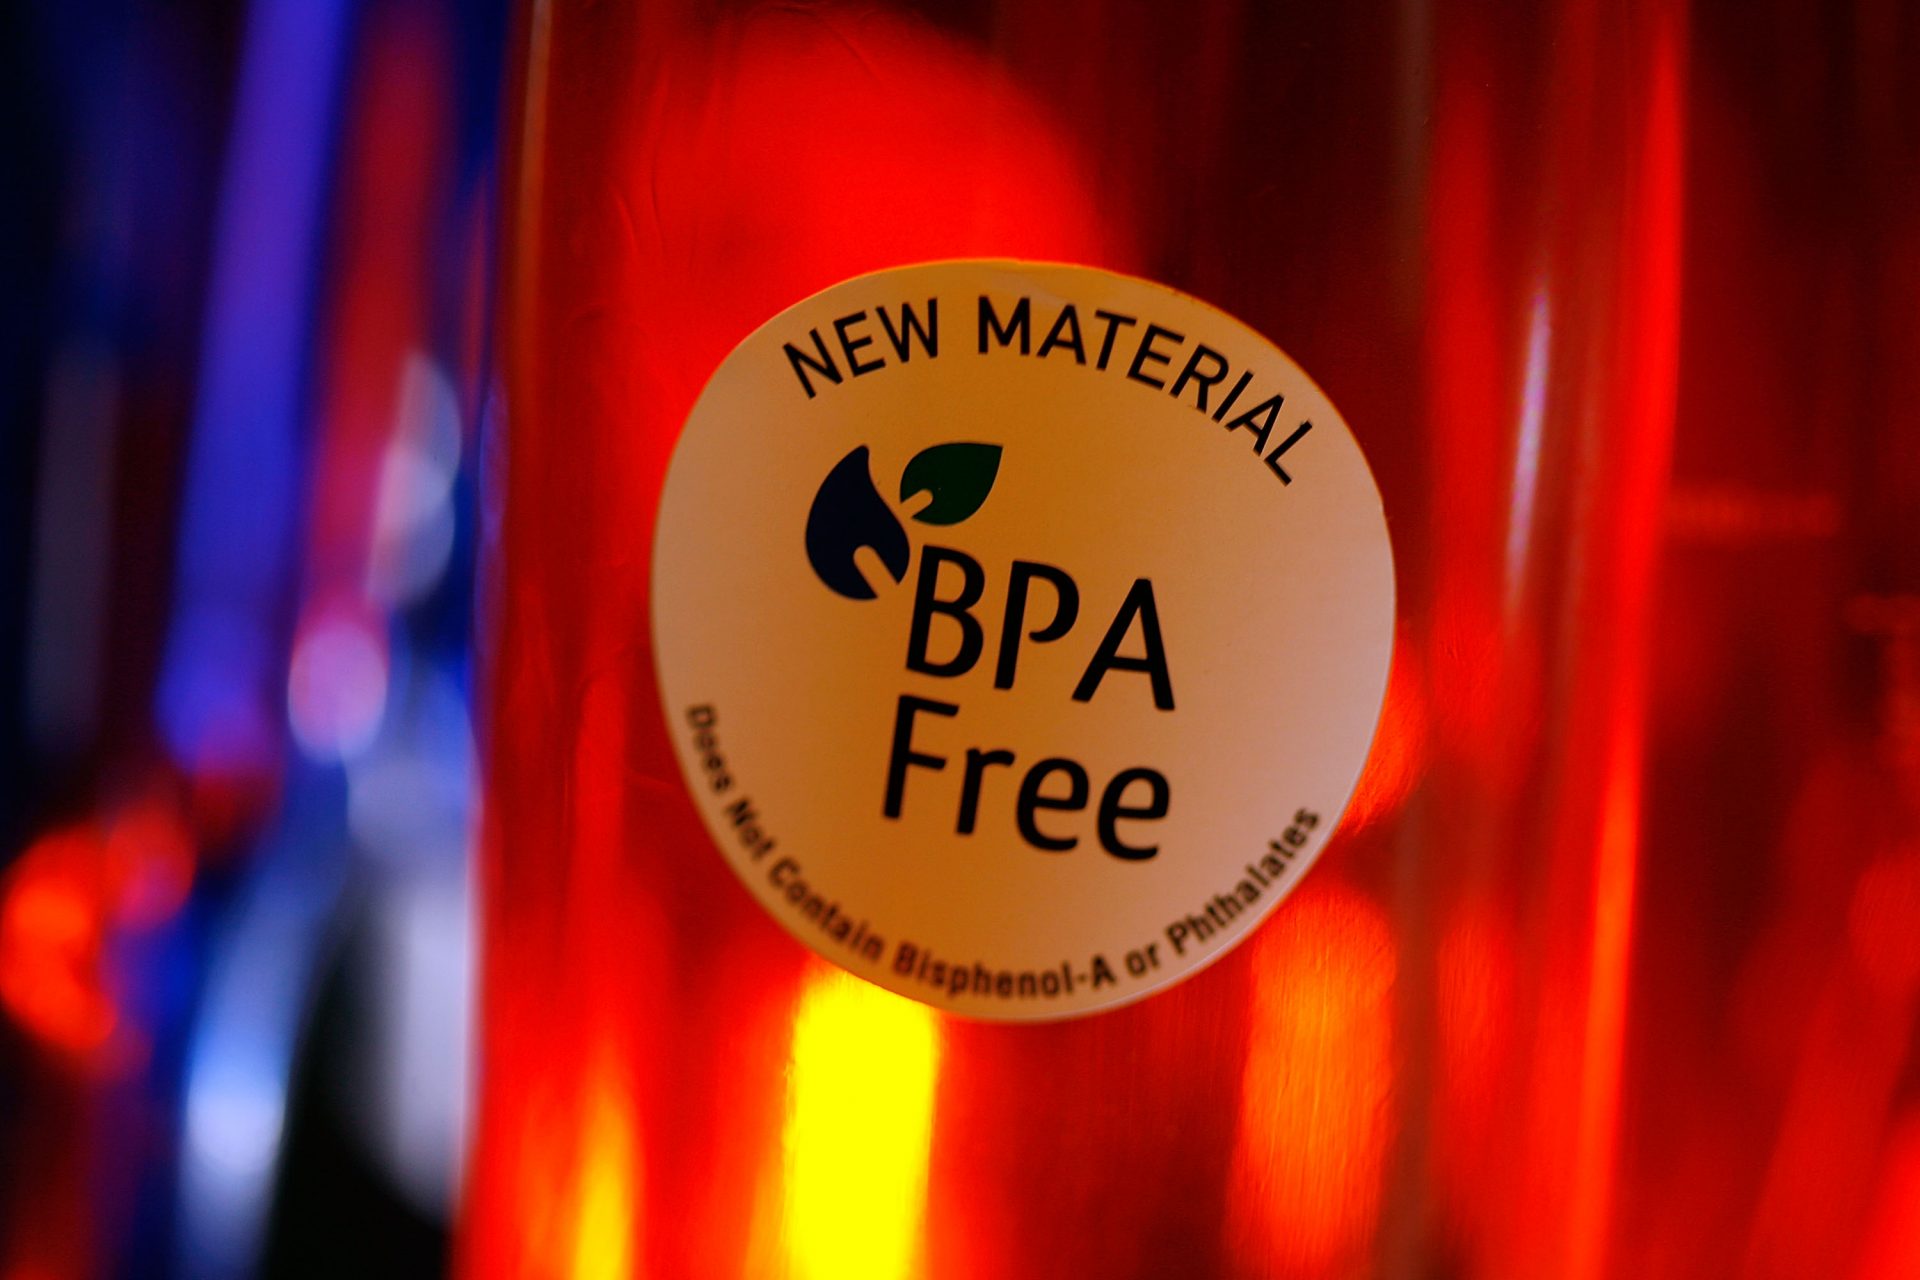 Even with the ban, people in France have high levels of BPA